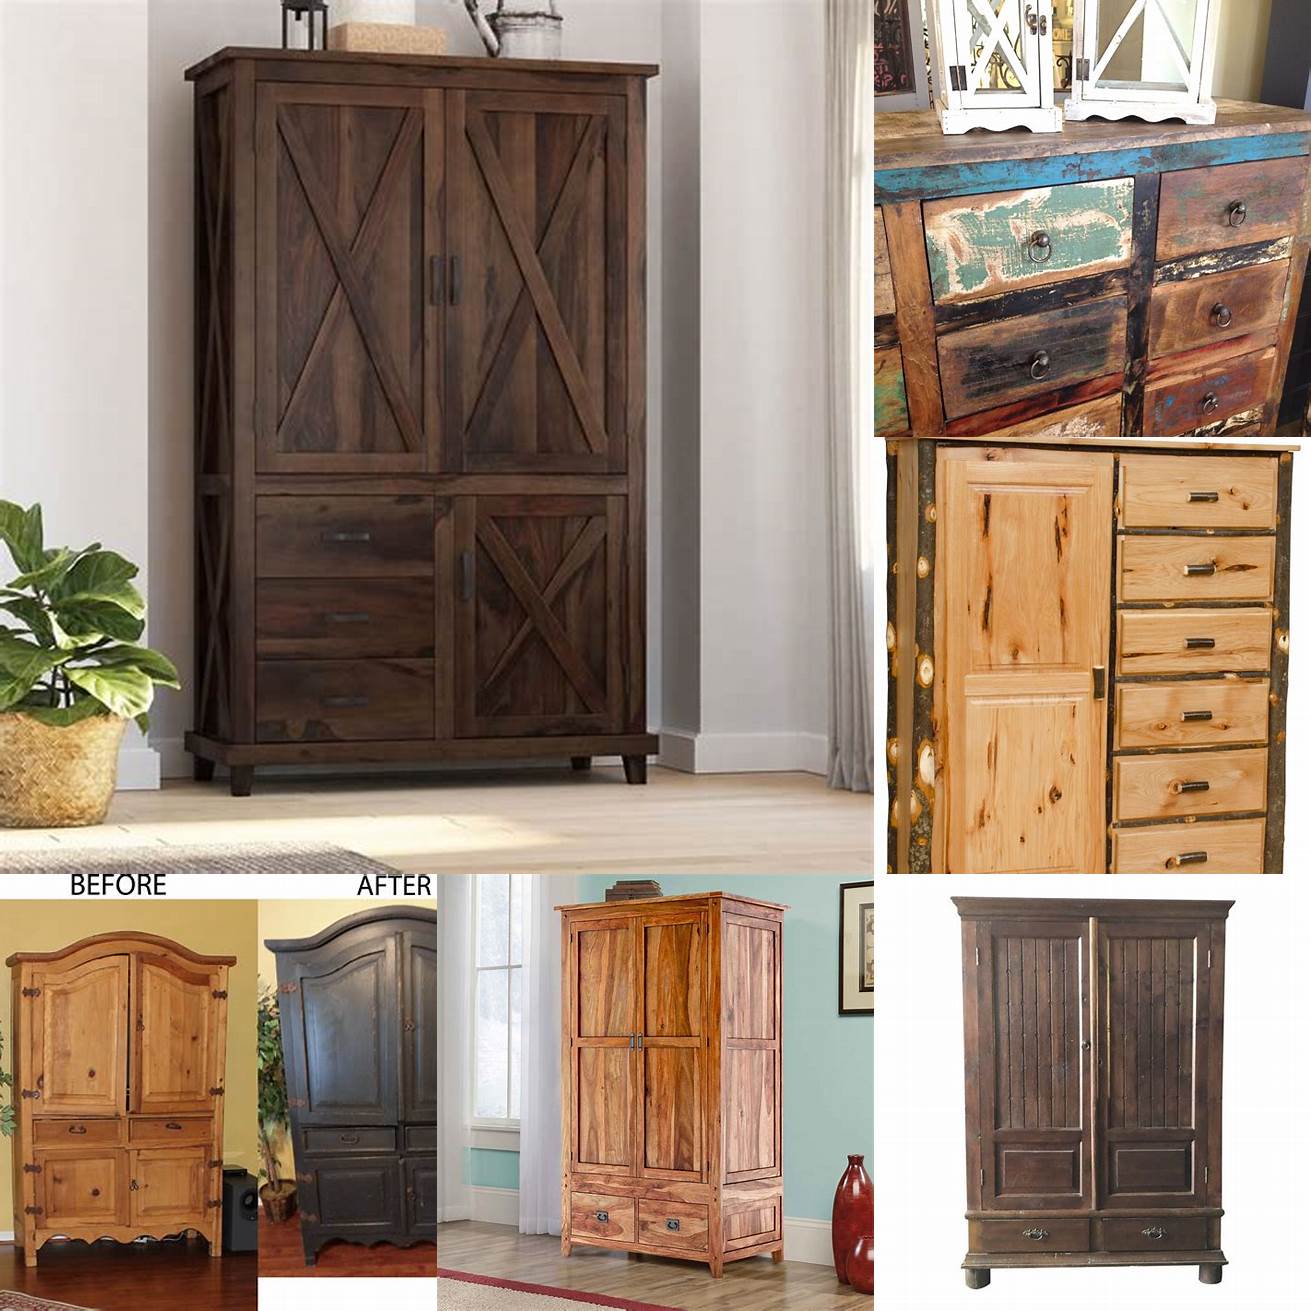 Rustic Armoires These are made of natural materials like wood and have a distressed finish